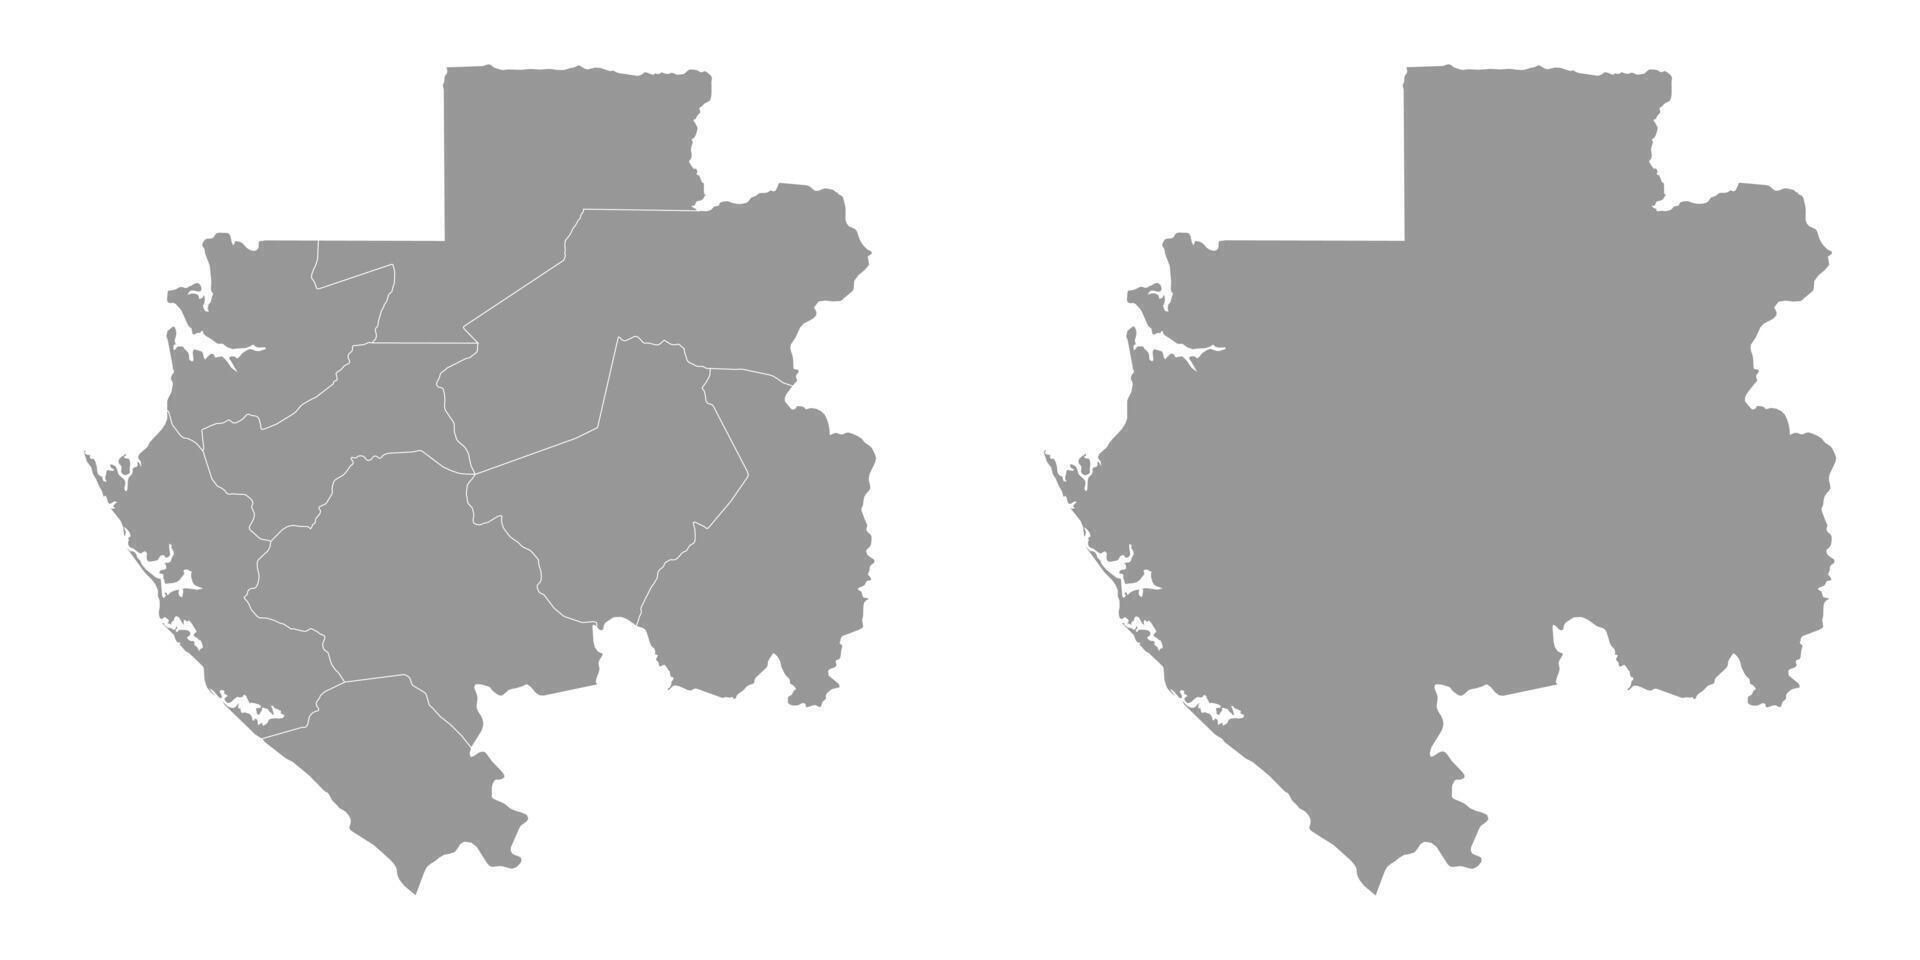 Gabon map with administrative divisions. Vector illustration.